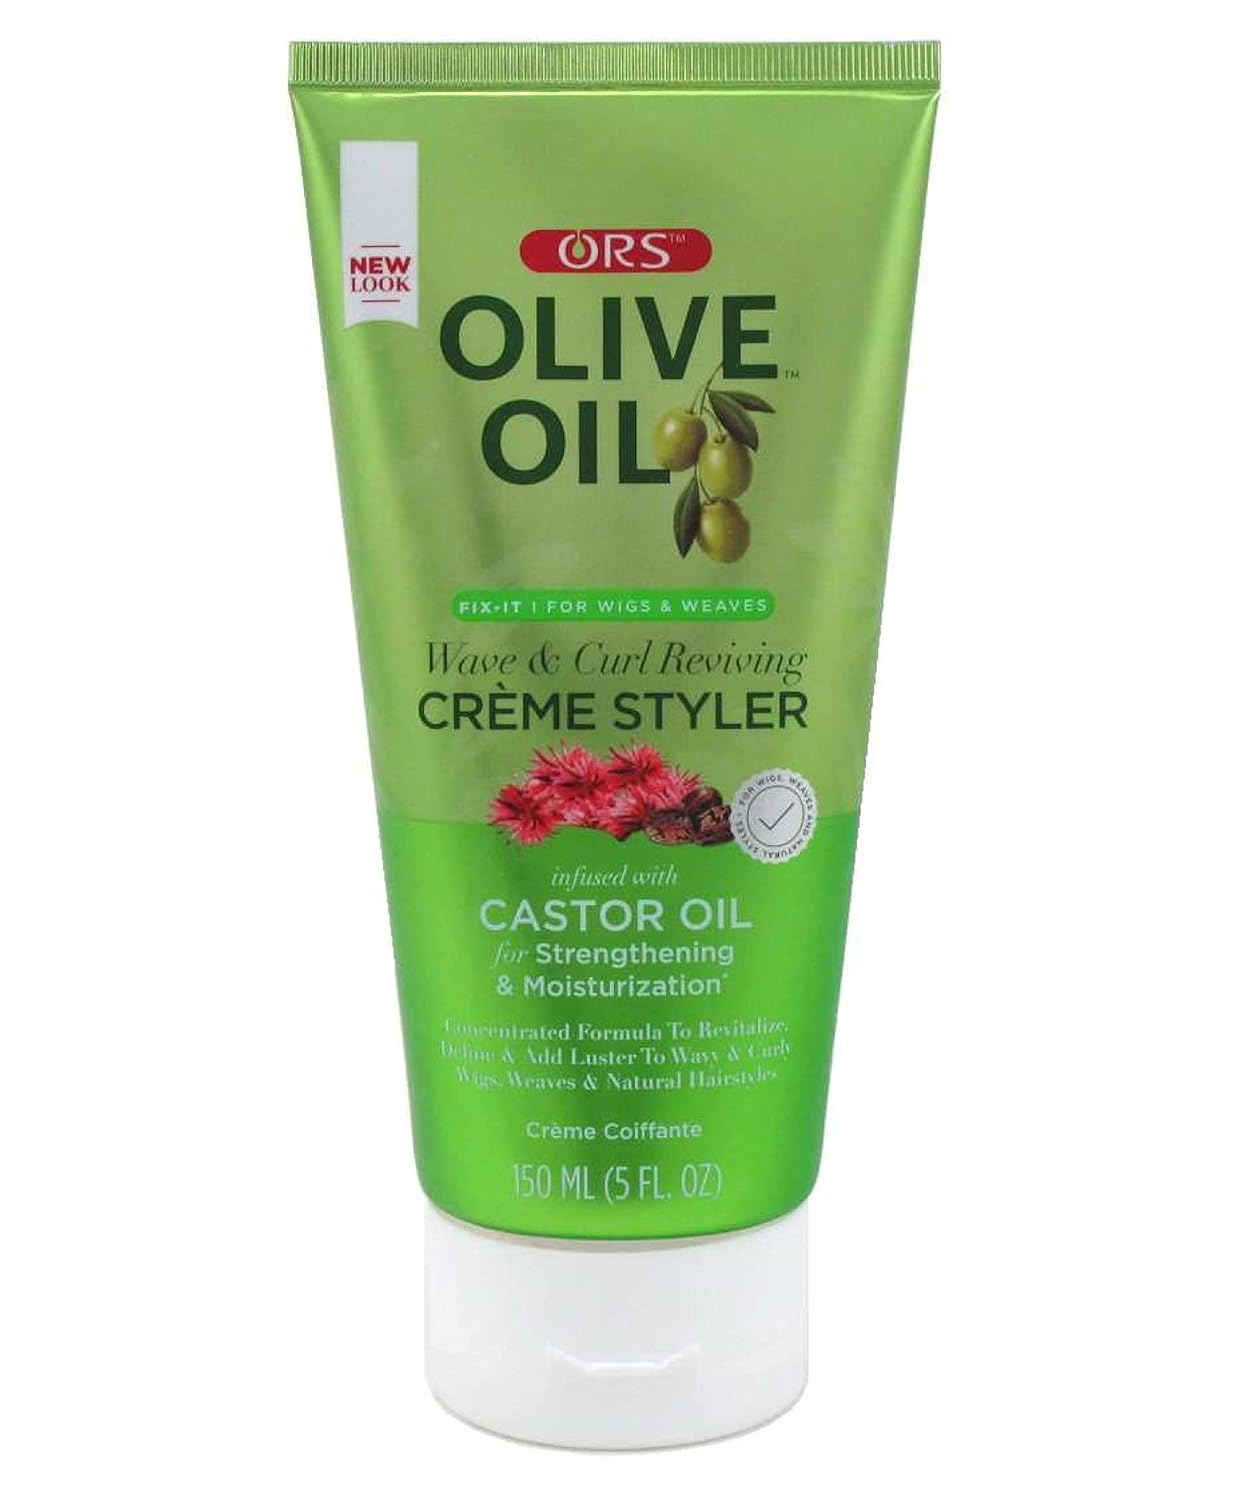 ORS Olive Oil Fix It No Grease Creme Styler, 5 Oz